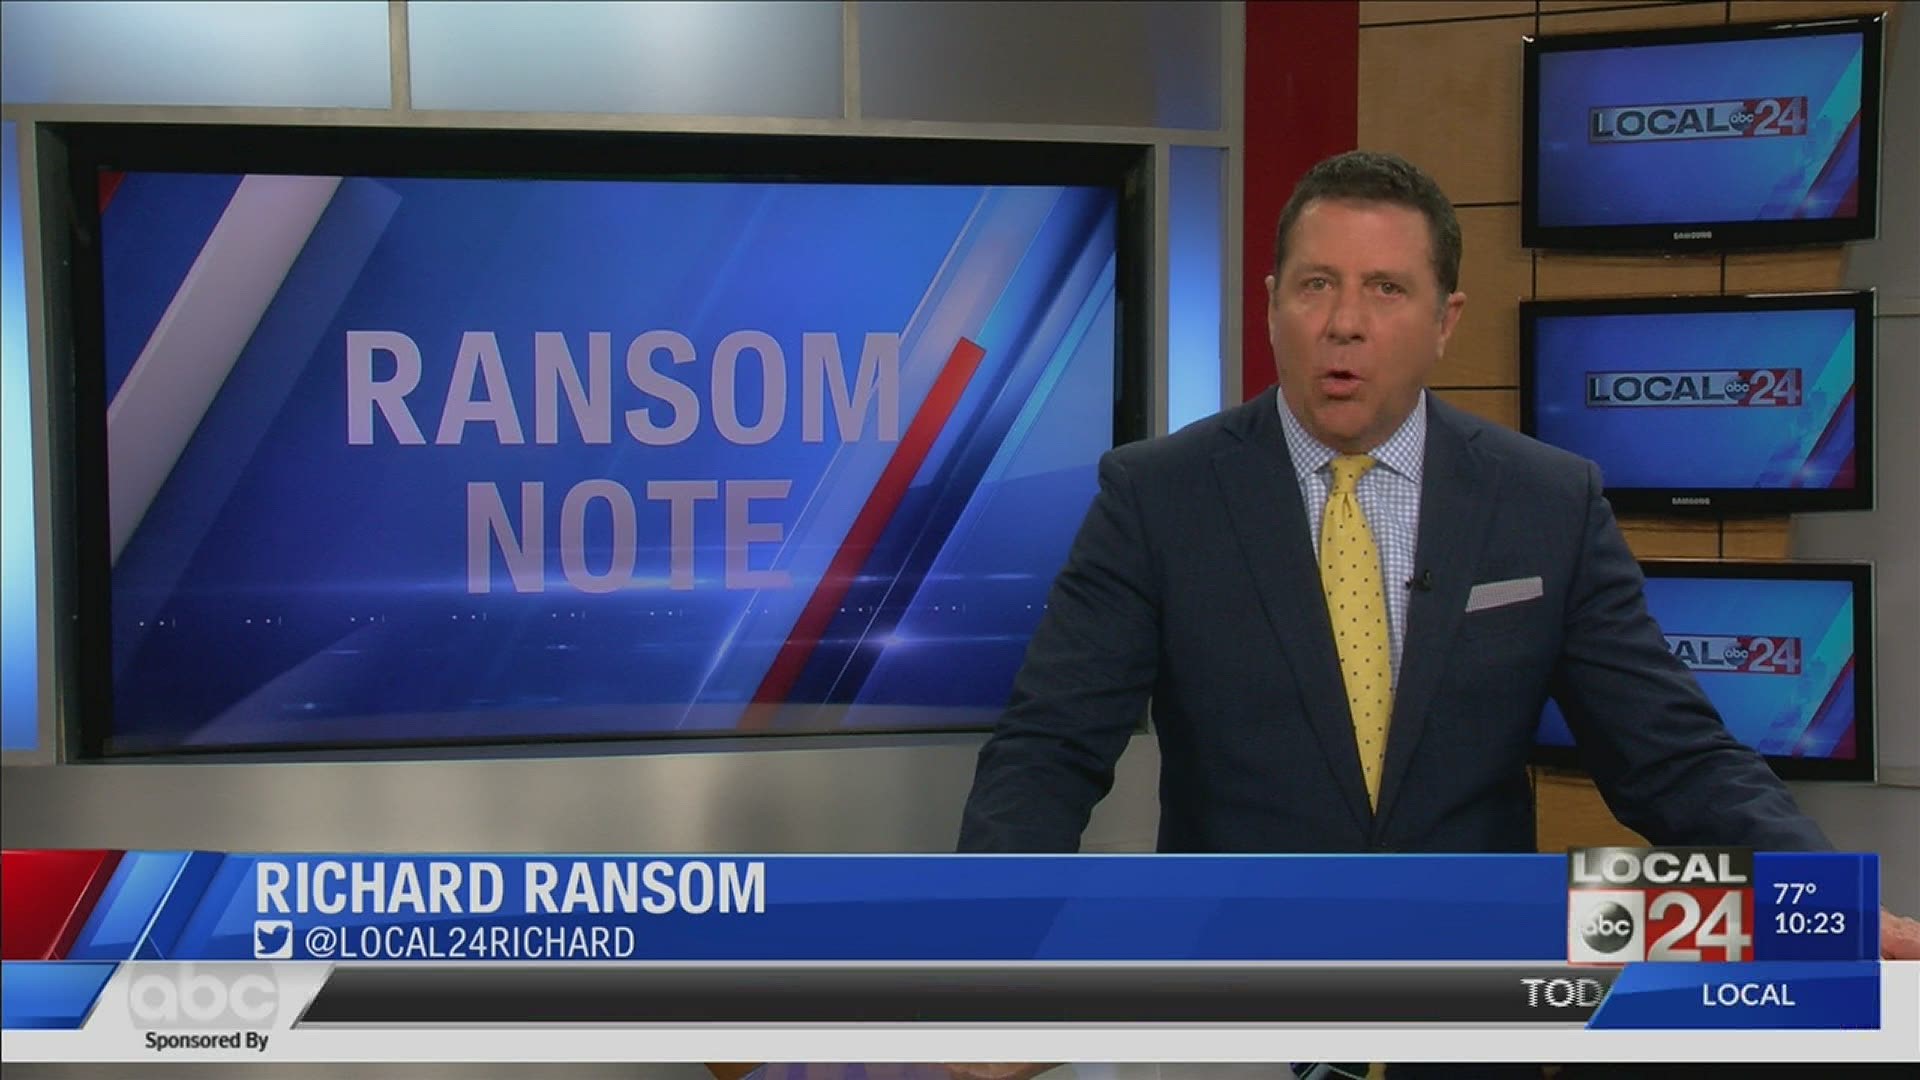 In his Ransom Note, Local 24 News Anchor Richard Ransom looks at the SEC's latest move, and what it means for the state.